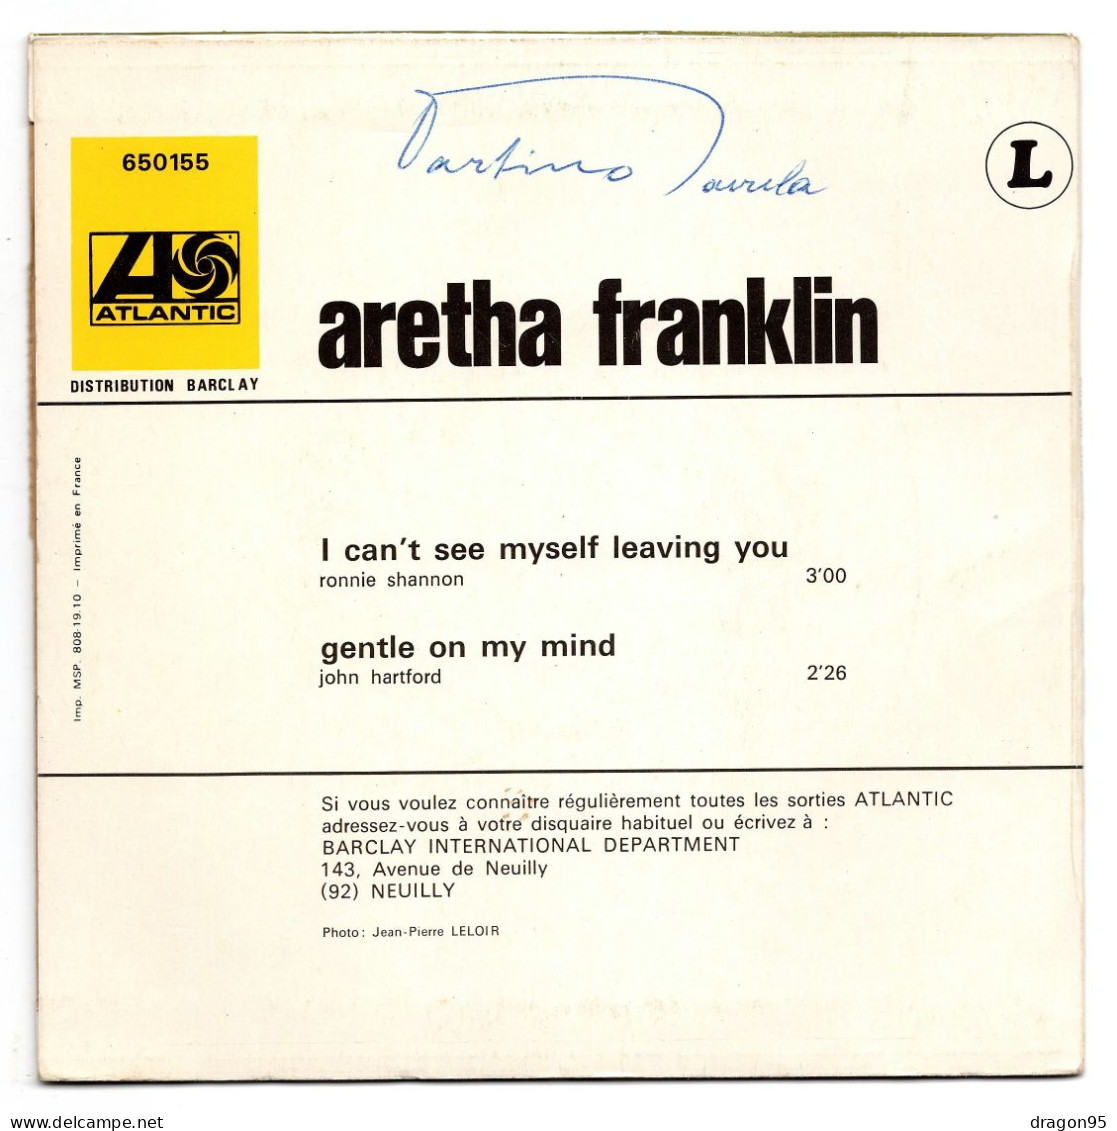 Aretha FRANKLIN : Gentle On My Mind - I Can't See Myself Leaving You - ATLANTIC 650155 - AA1 - Soul - R&B